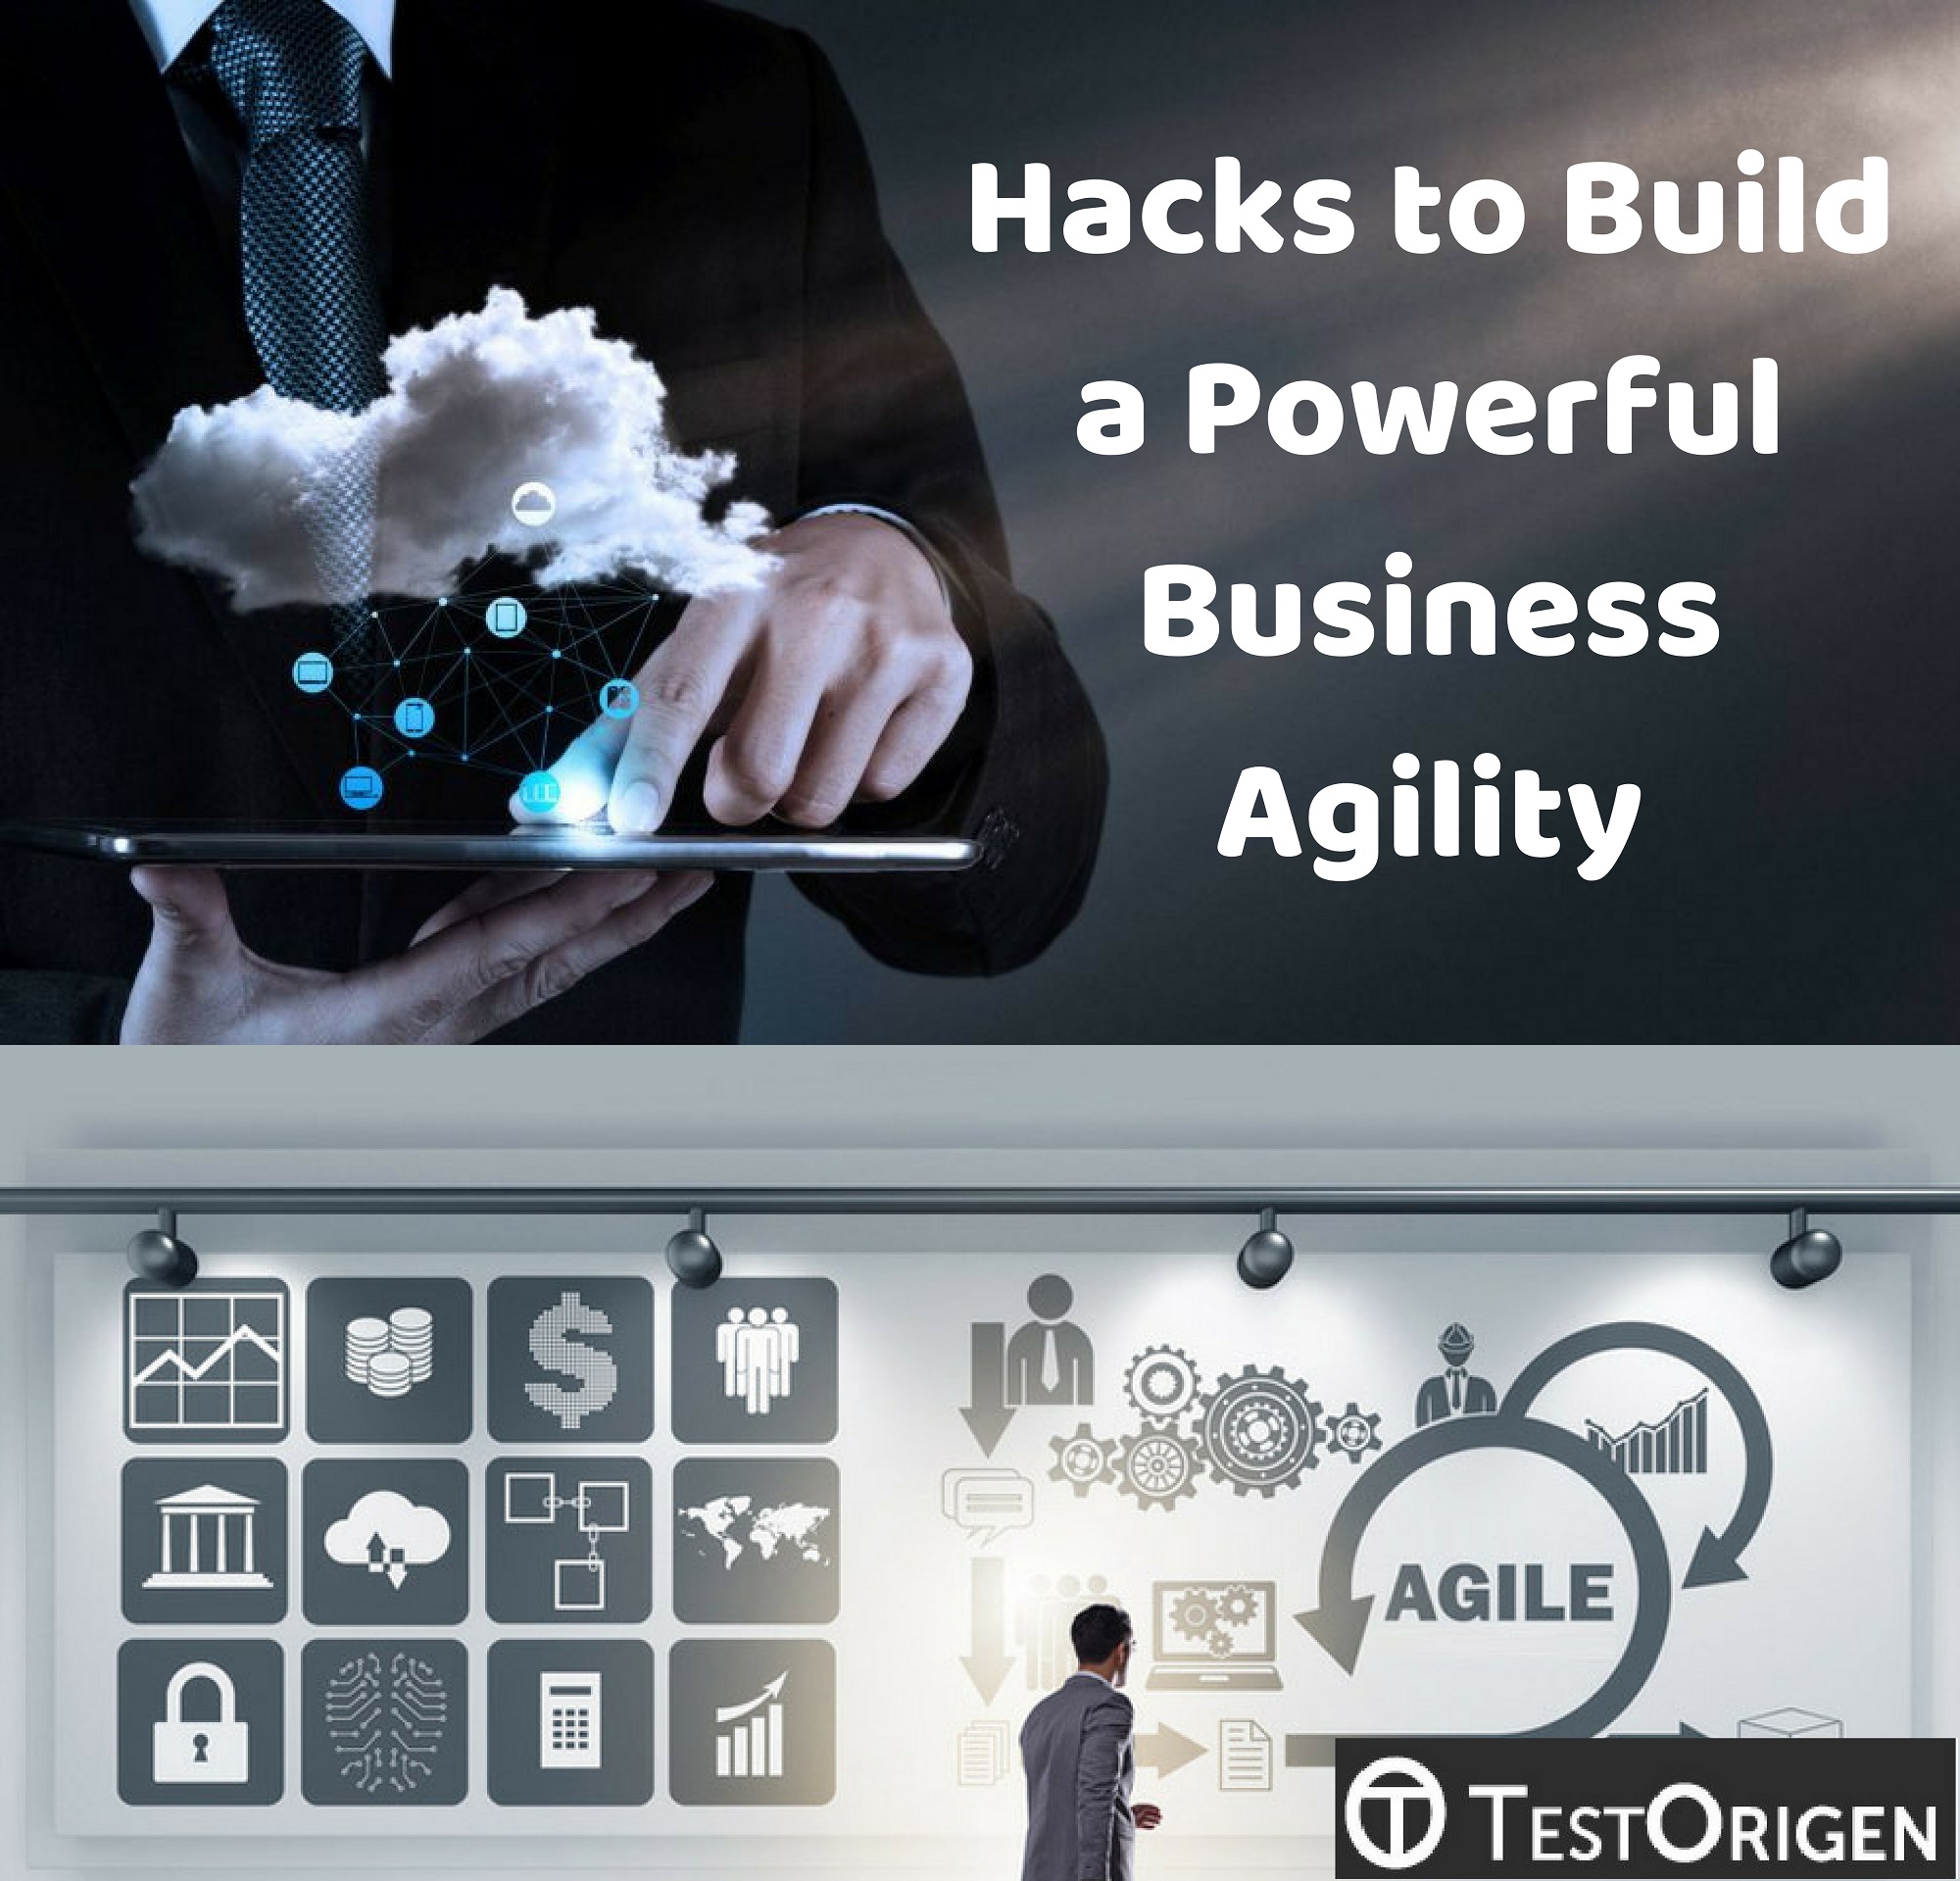 Hacks to Build a Powerful Business Agility